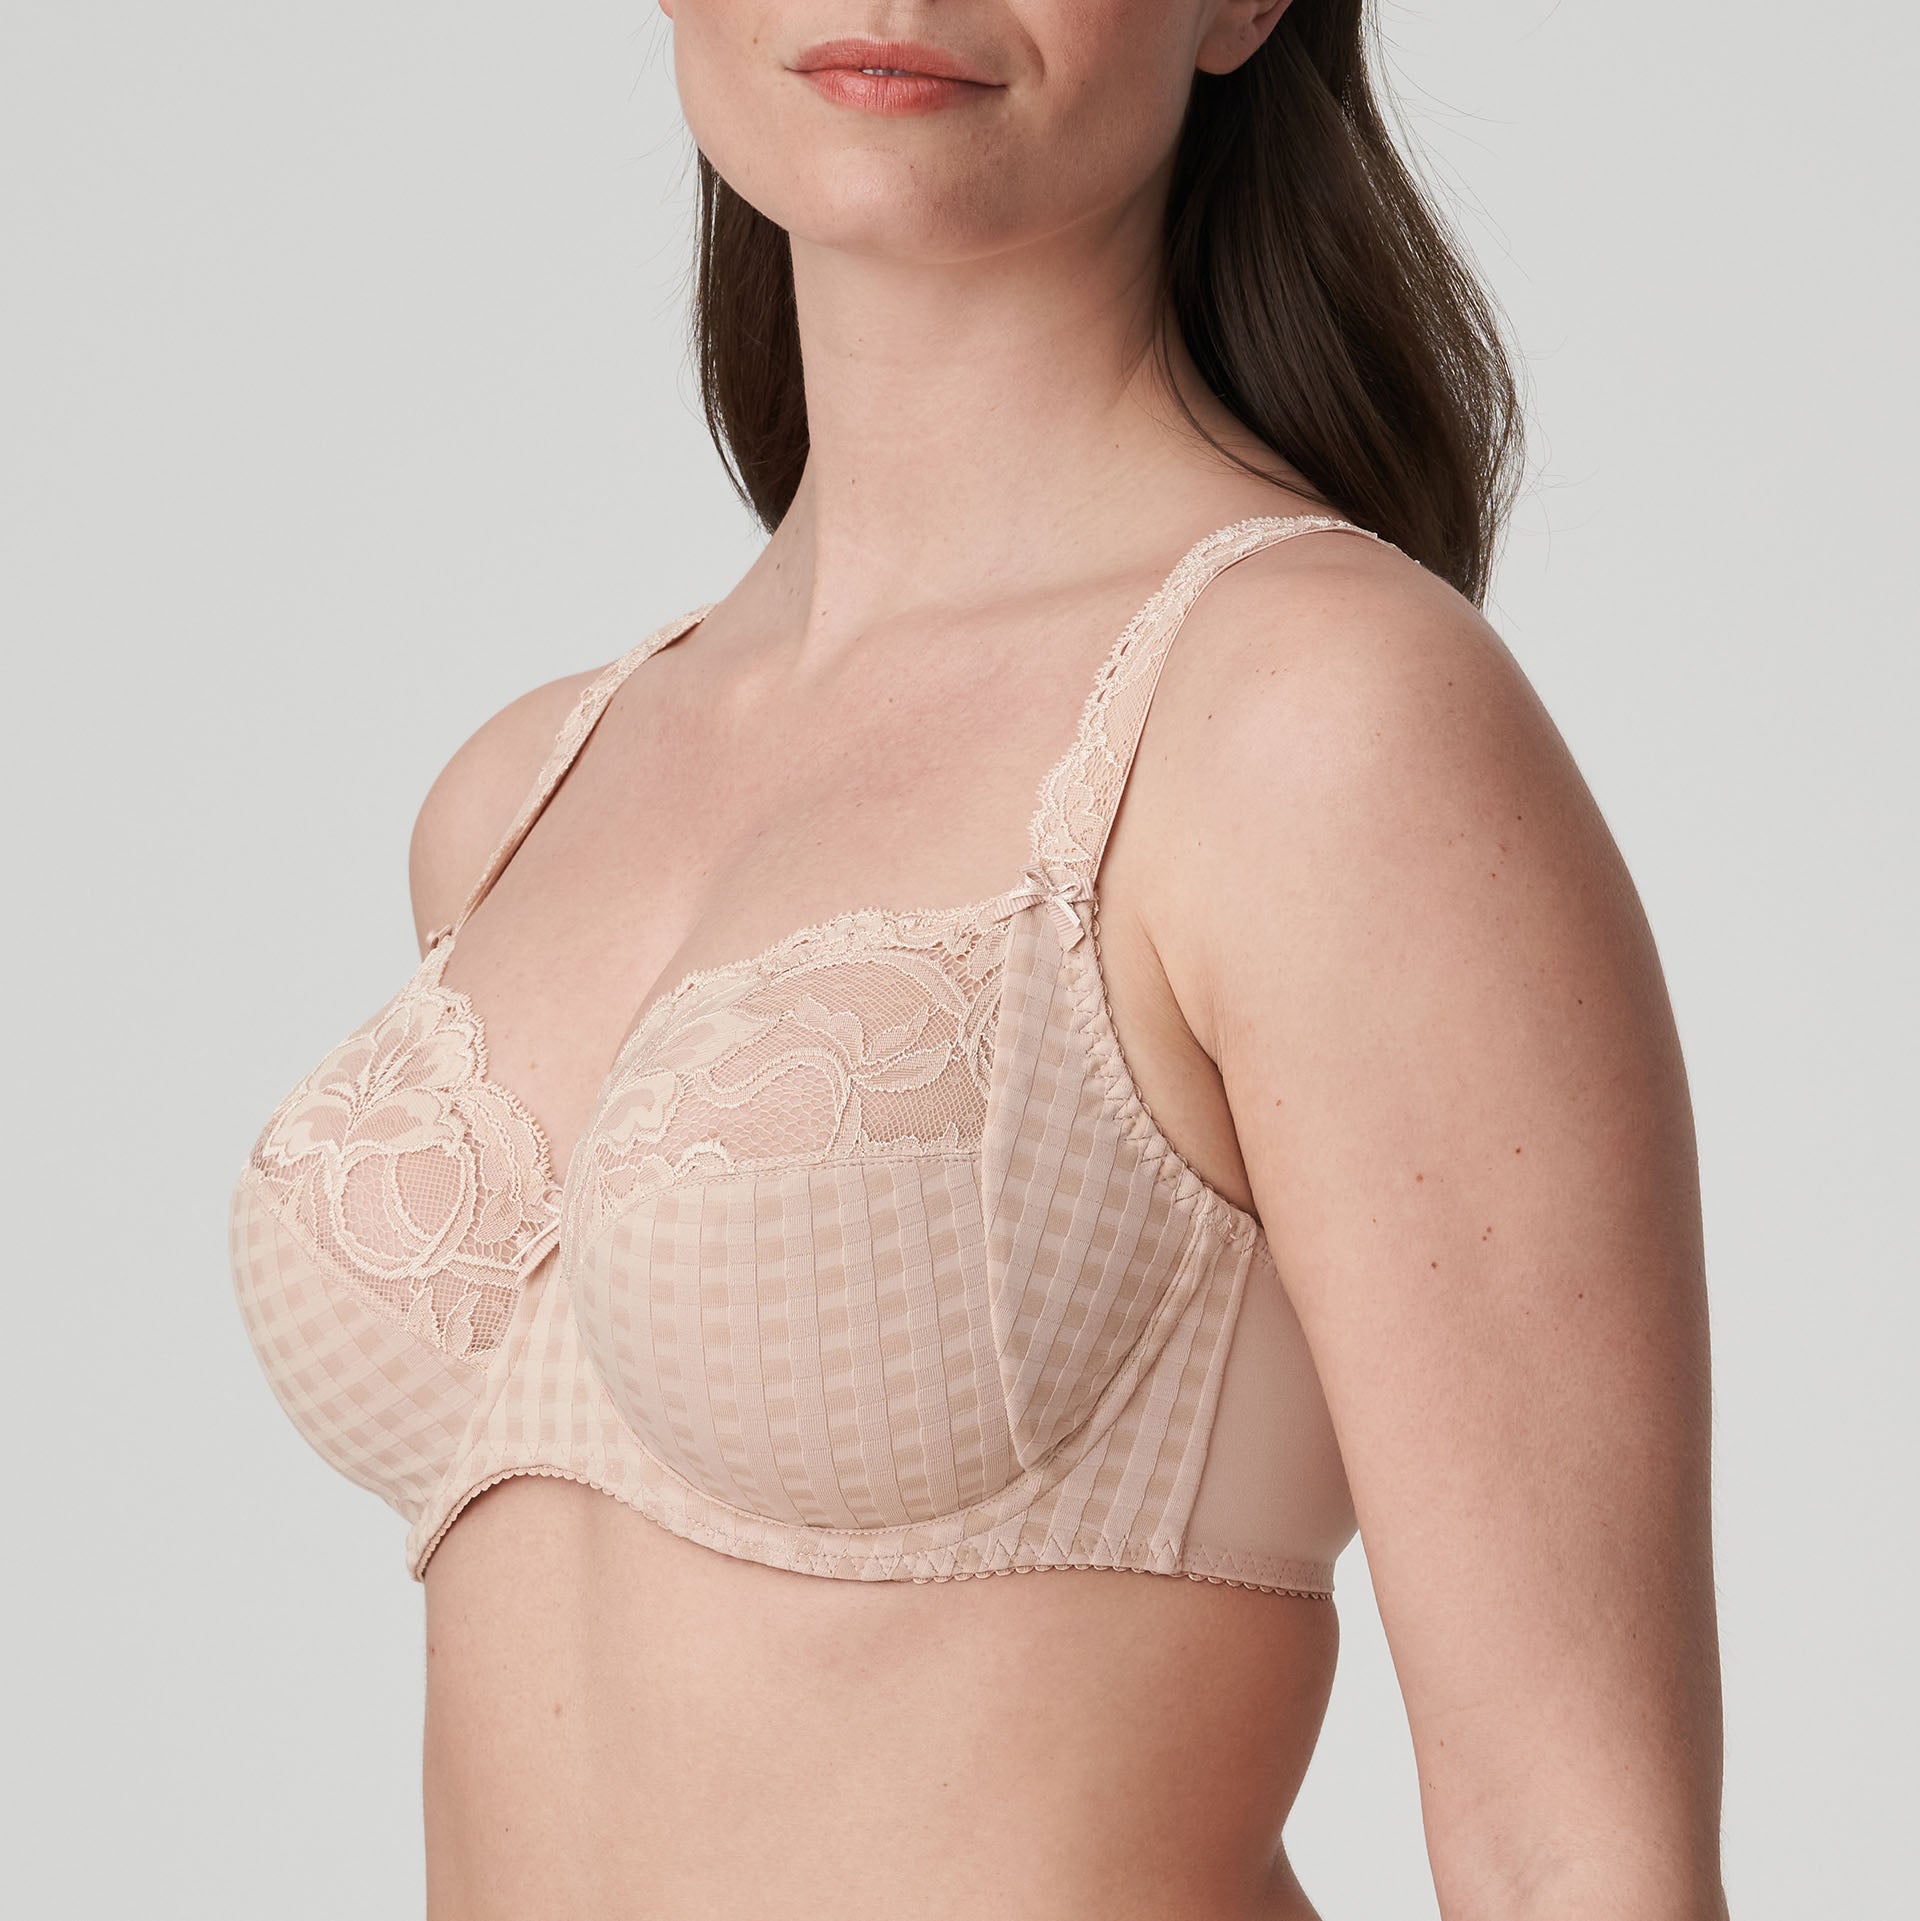 G and H Cup Bra Sizes